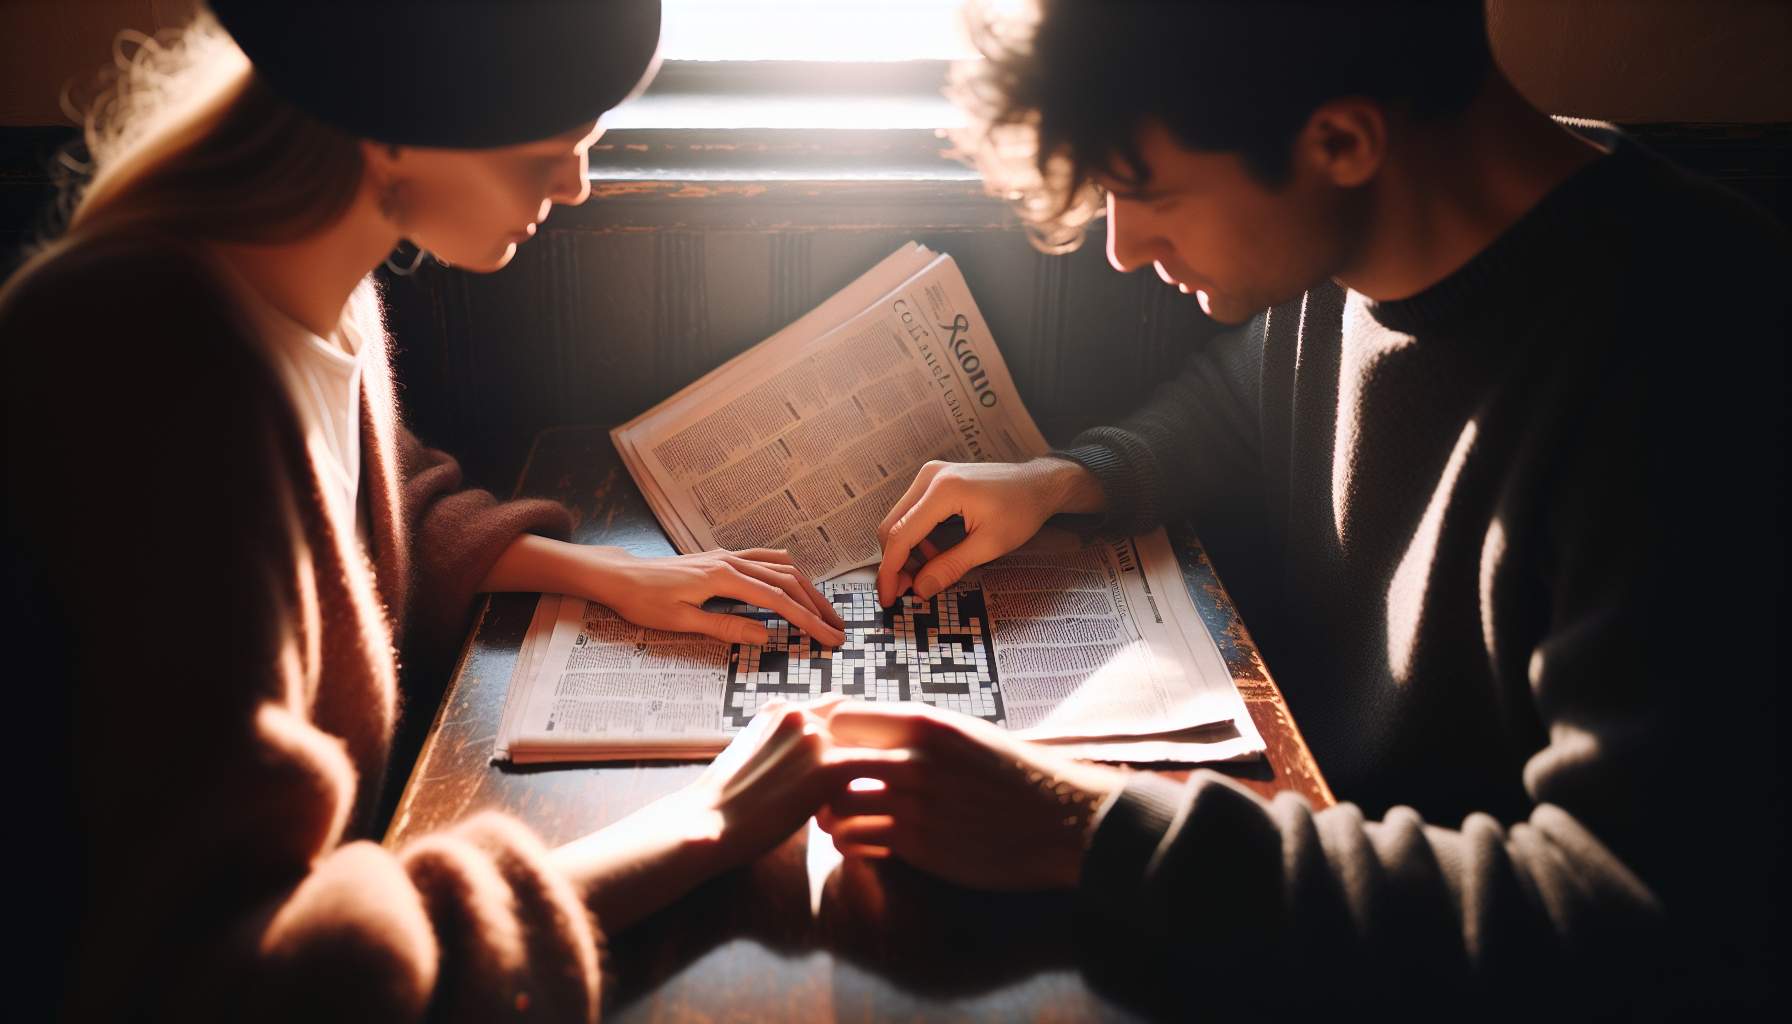 get who gets you dating site crossword